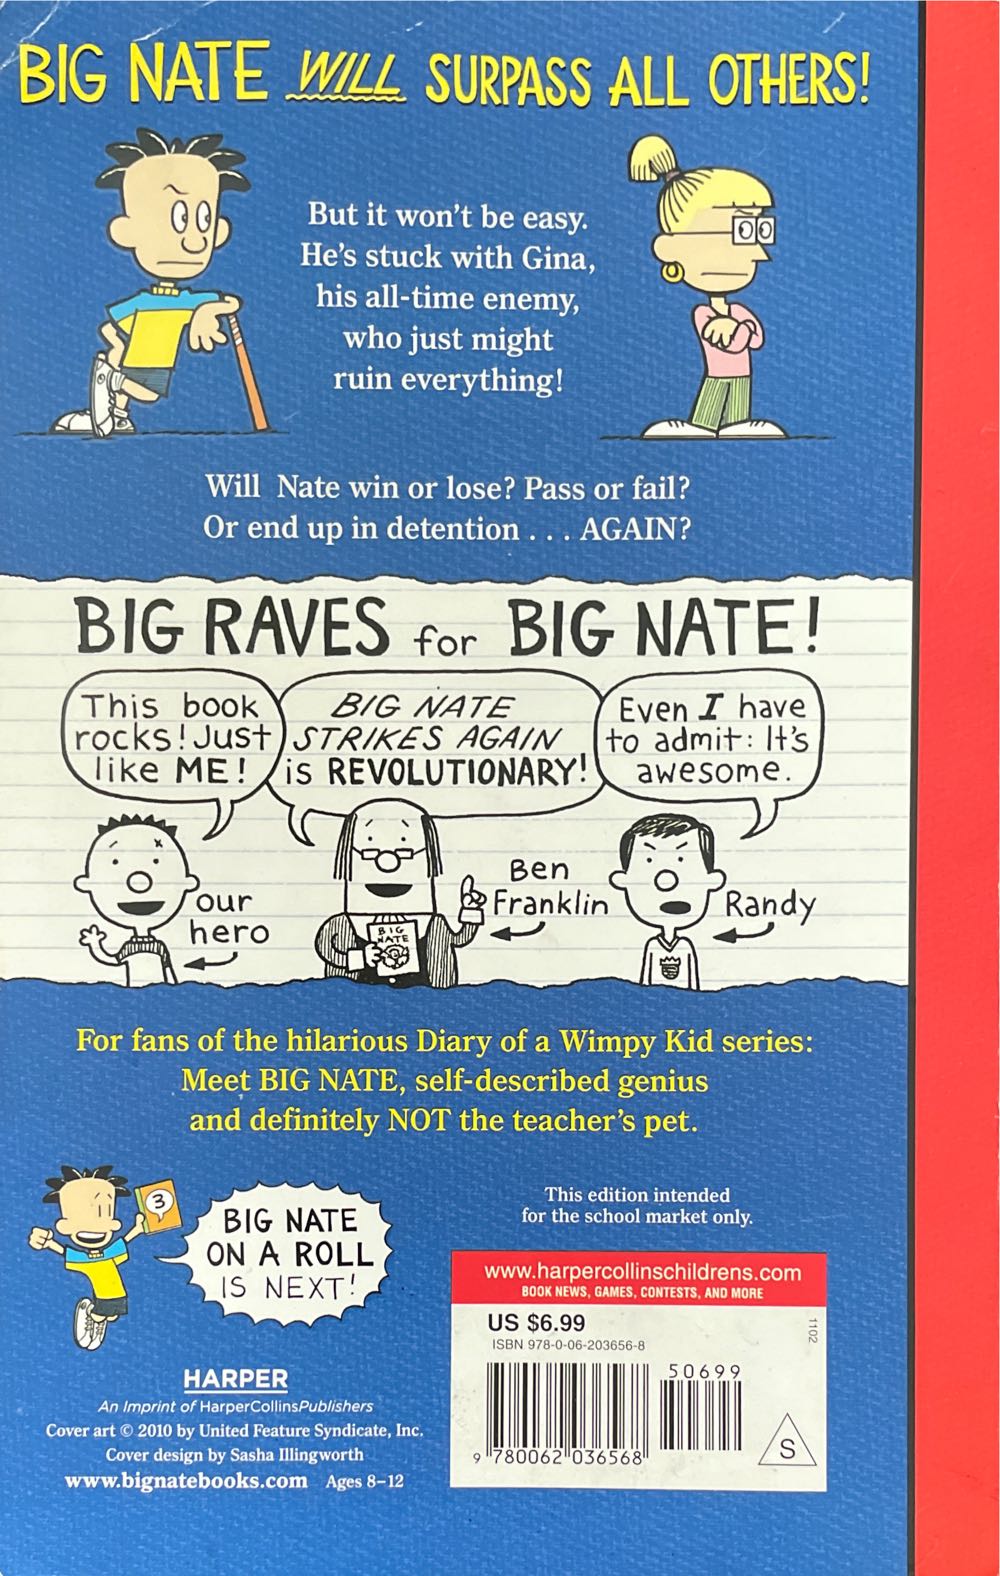 Big Nate 2: Strikes Again - Lincoln Peirce (Harper Collins - Paperback) book collectible [Barcode 9780062036568] - Main Image 2